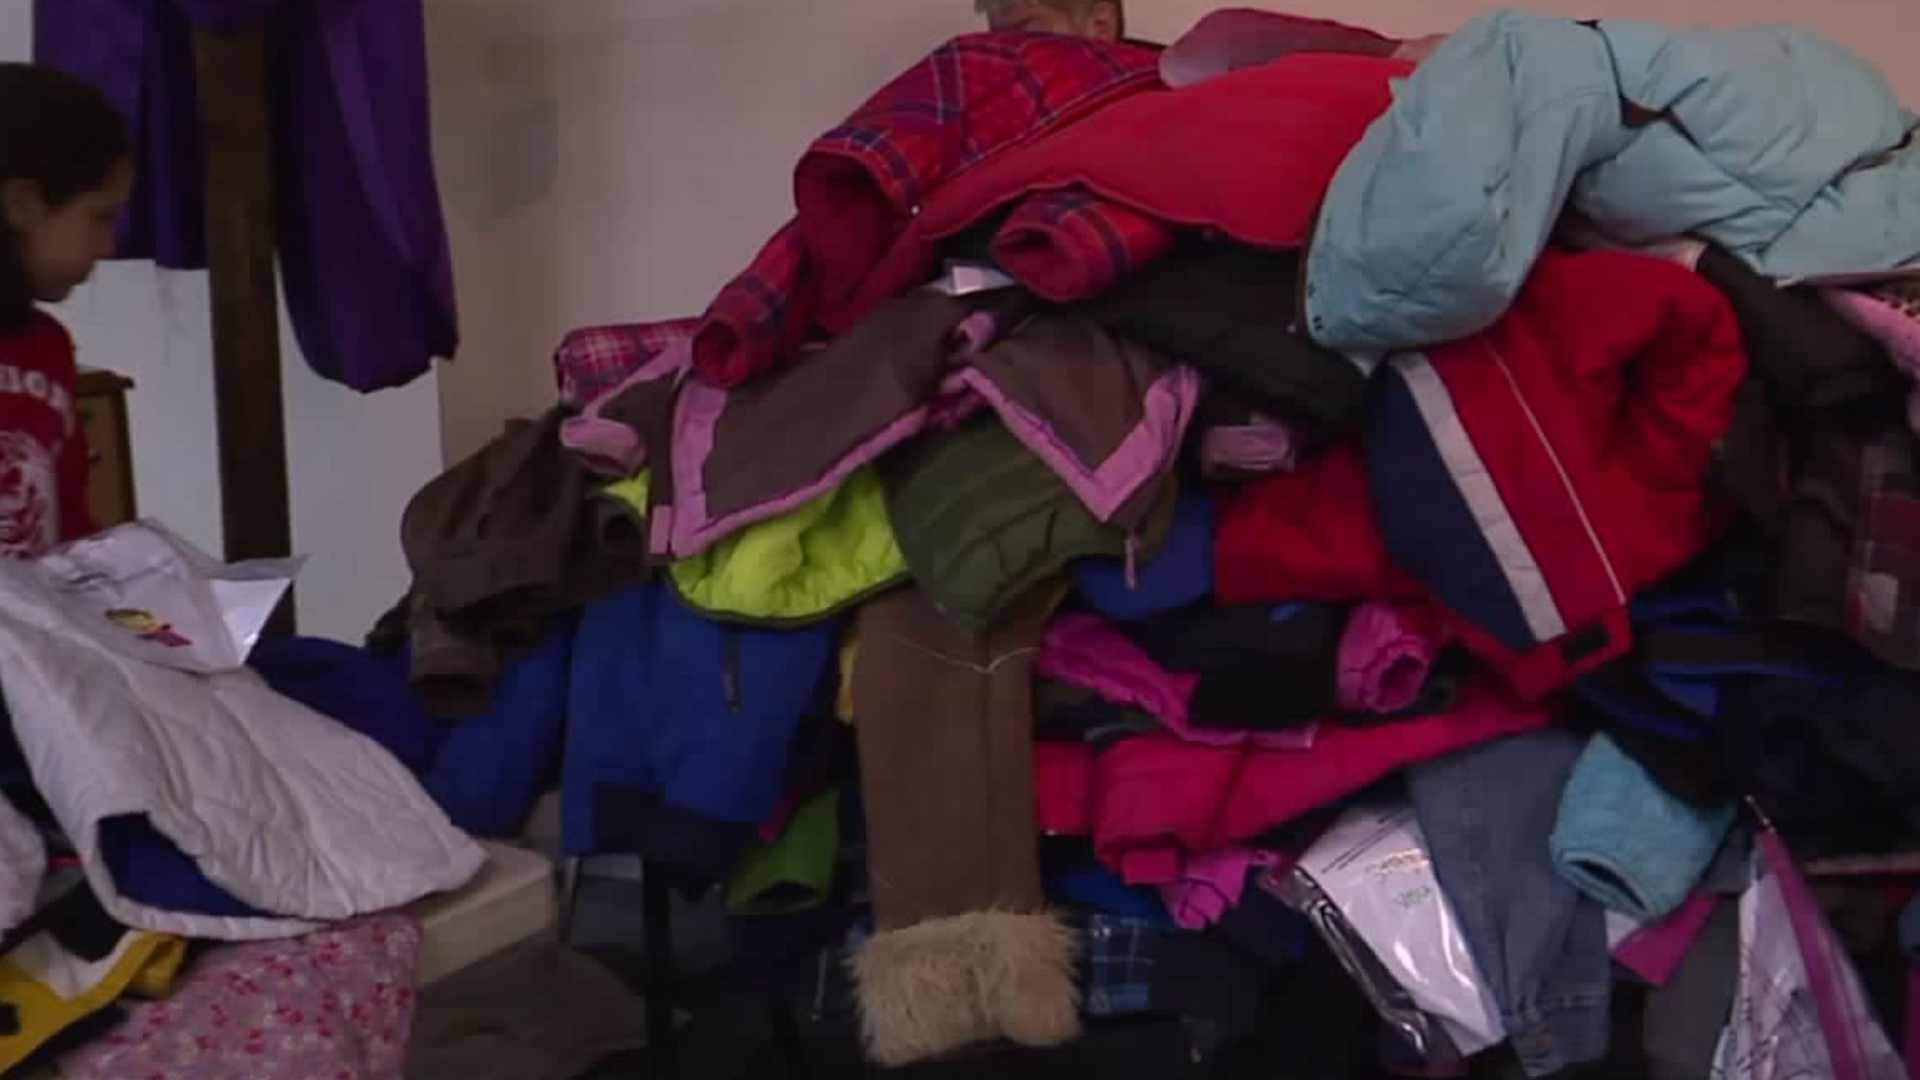 Local boy collects and donates 1,000 coats to the needy in York